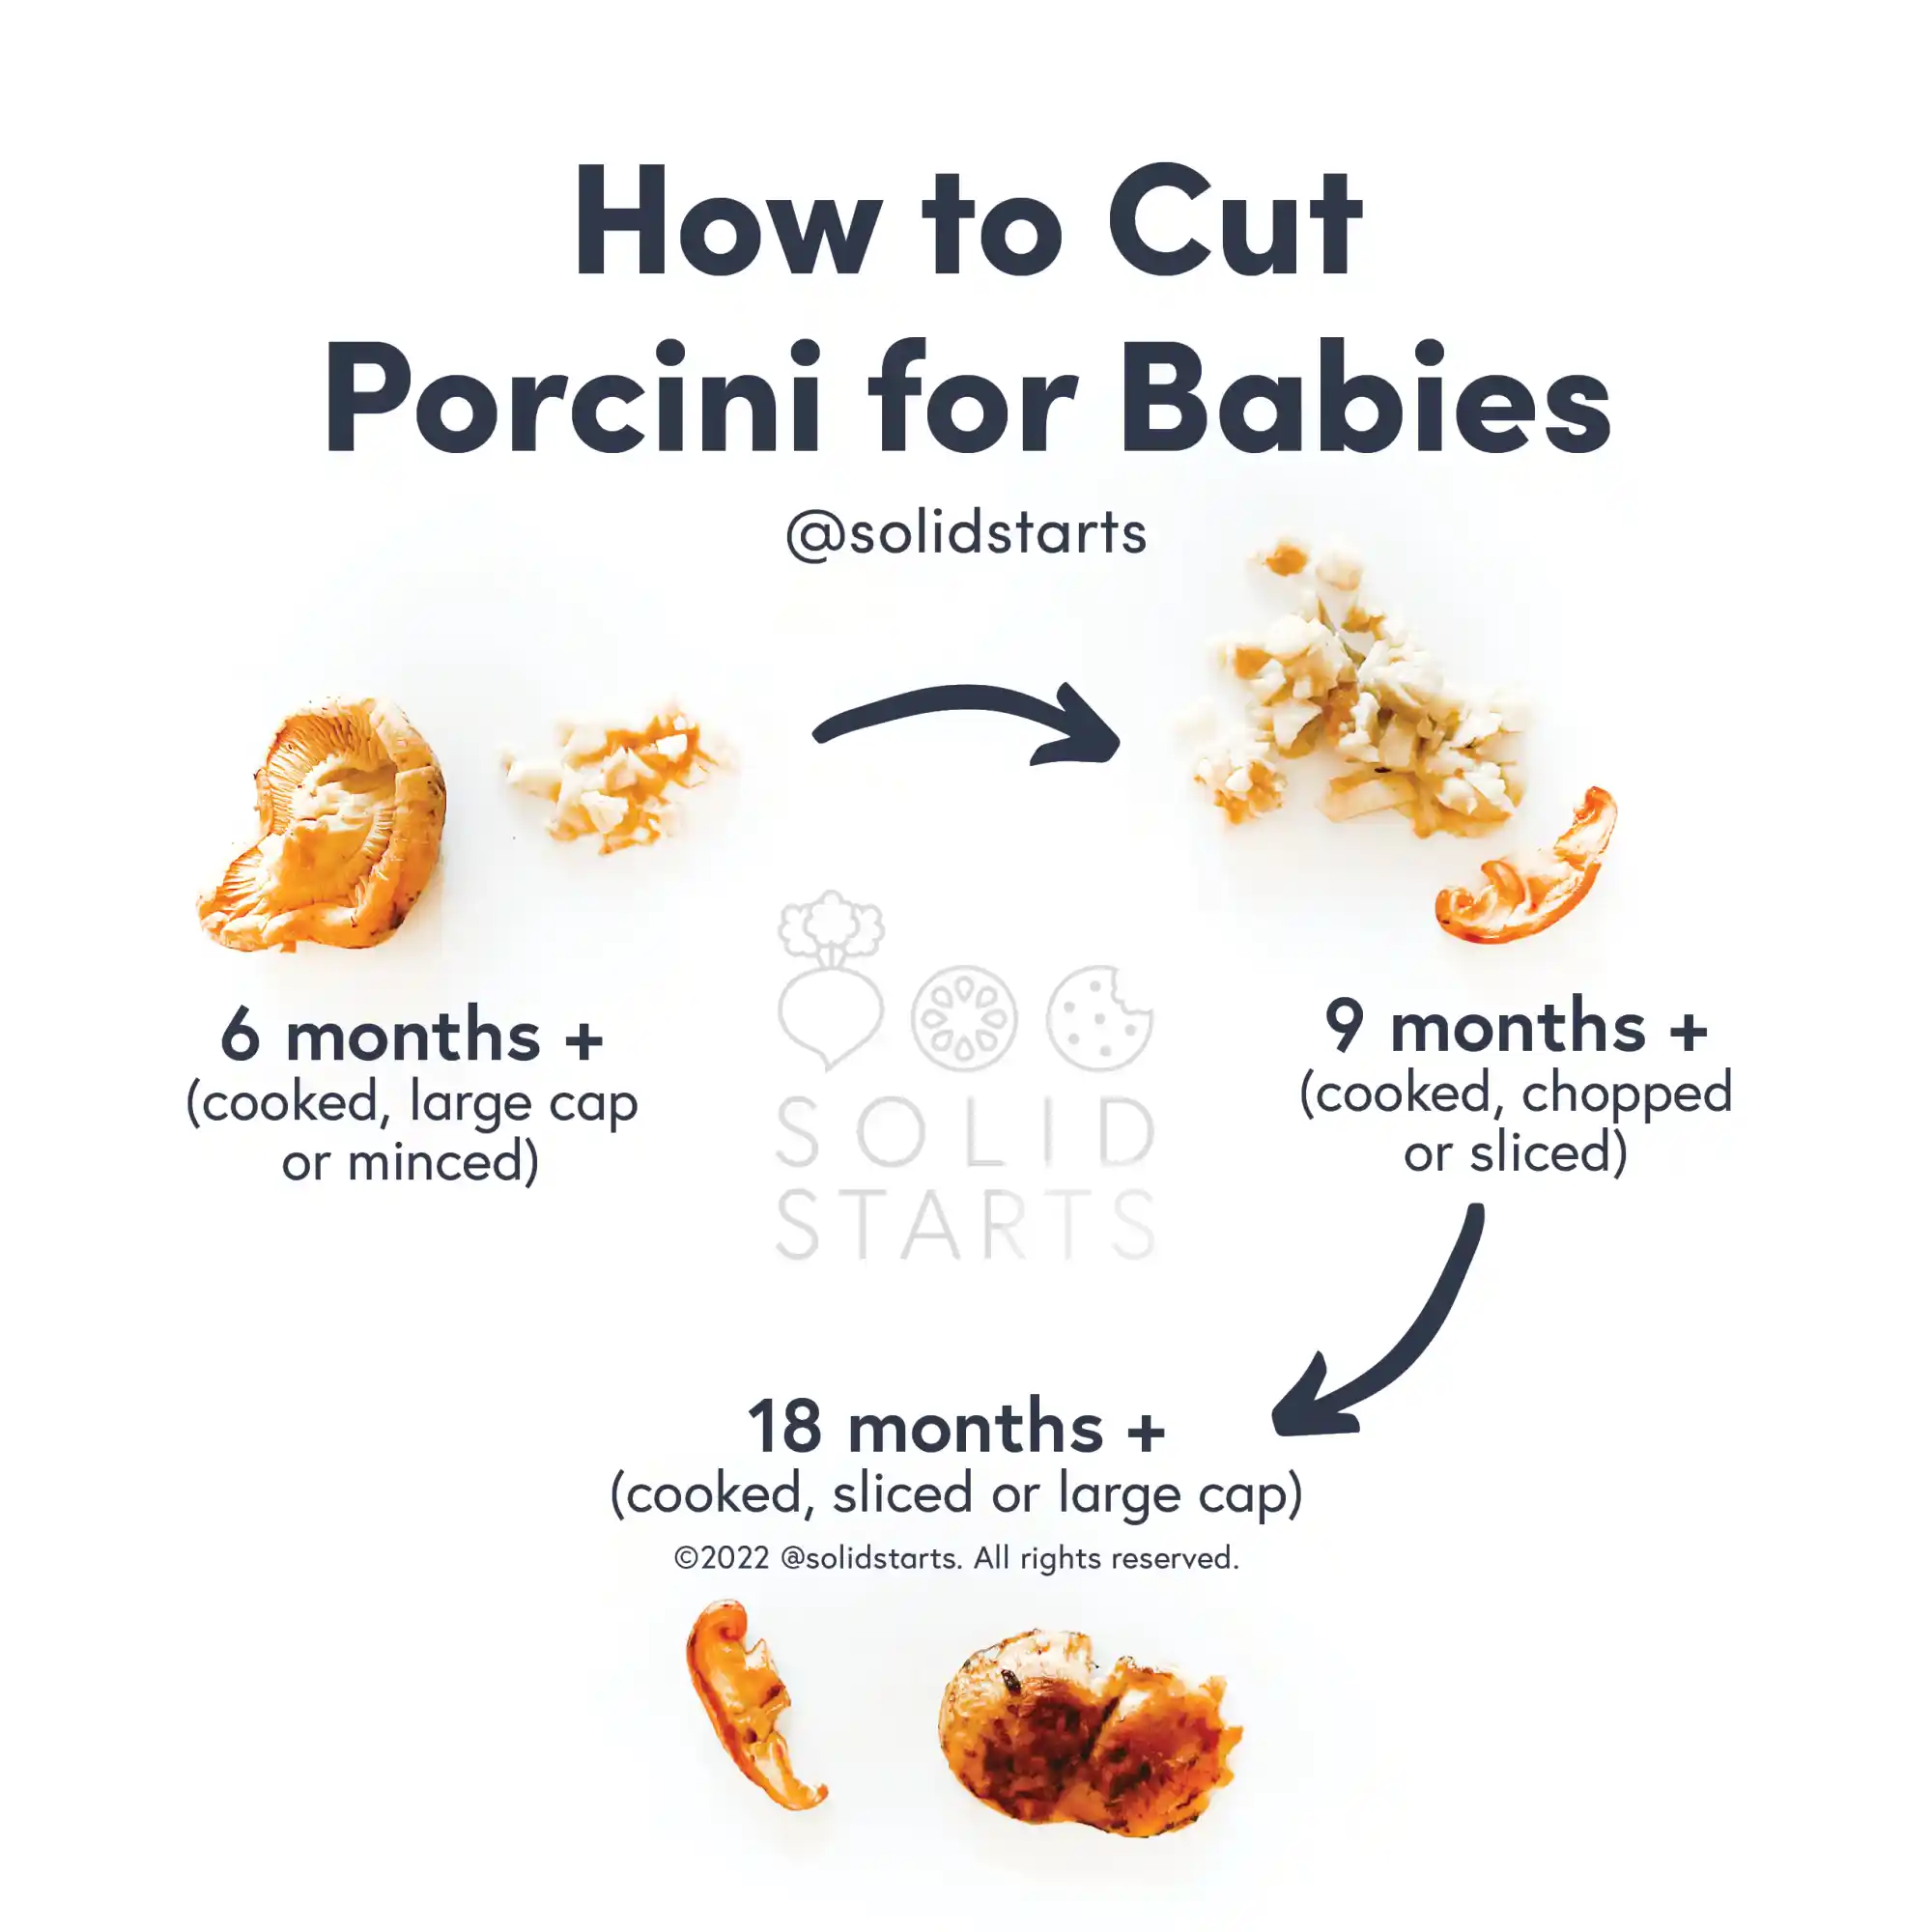 a Solid Starts infographic with the header How to Cut Porcini for Babies: cooked large cap or finely chopped for 6 months, cooked and chopped or sliced for 9 months, and cooked sliced or large cap for 18 months